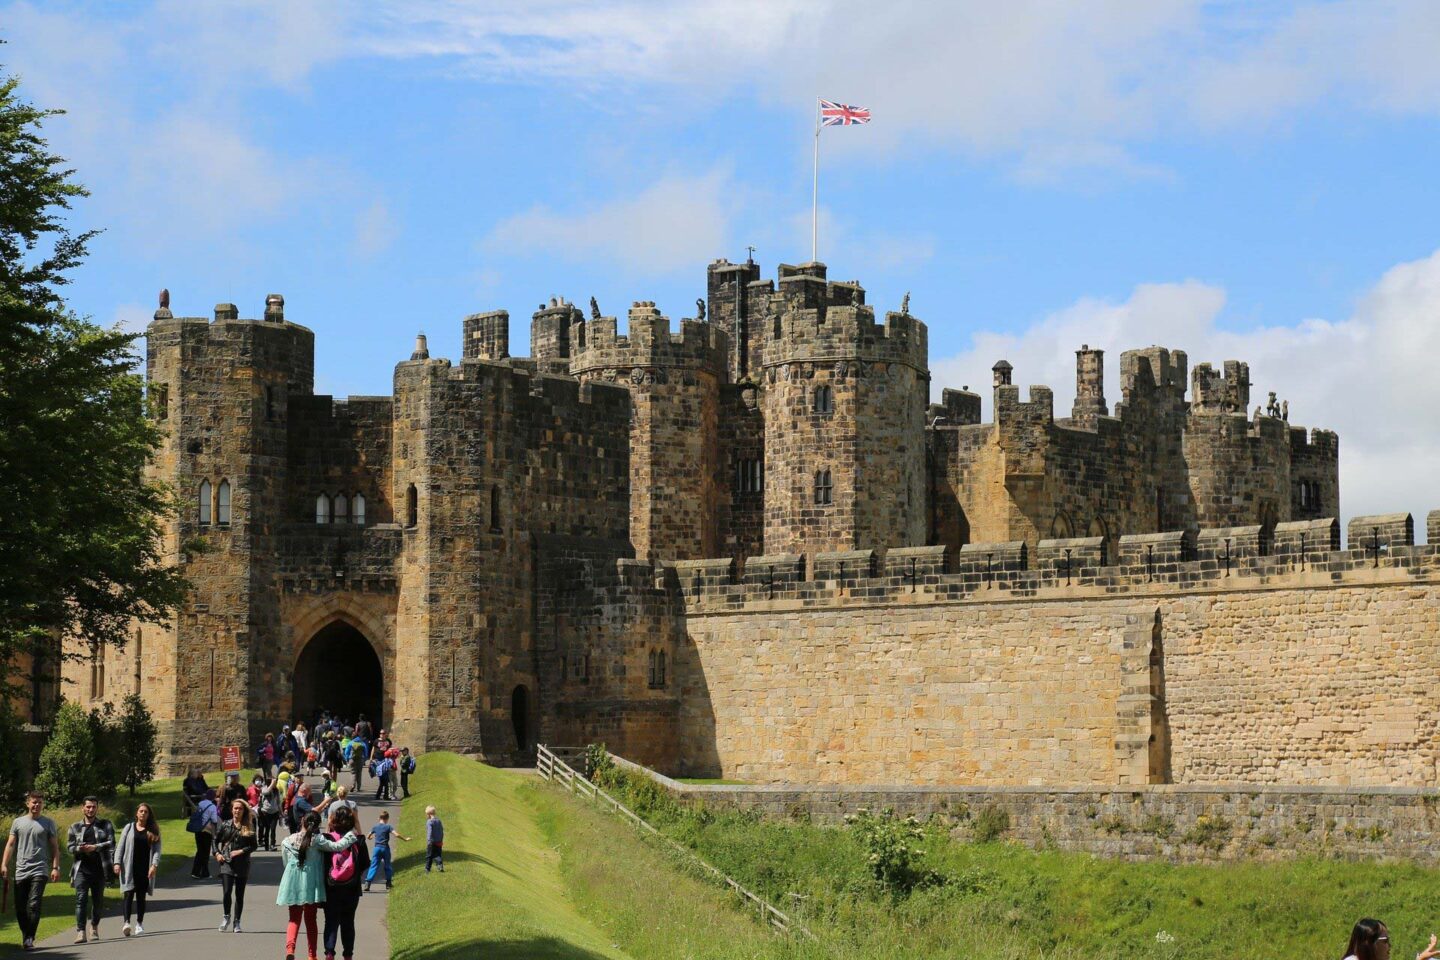 The entrance of Alnwick Castle, the largest castle in Northumberland